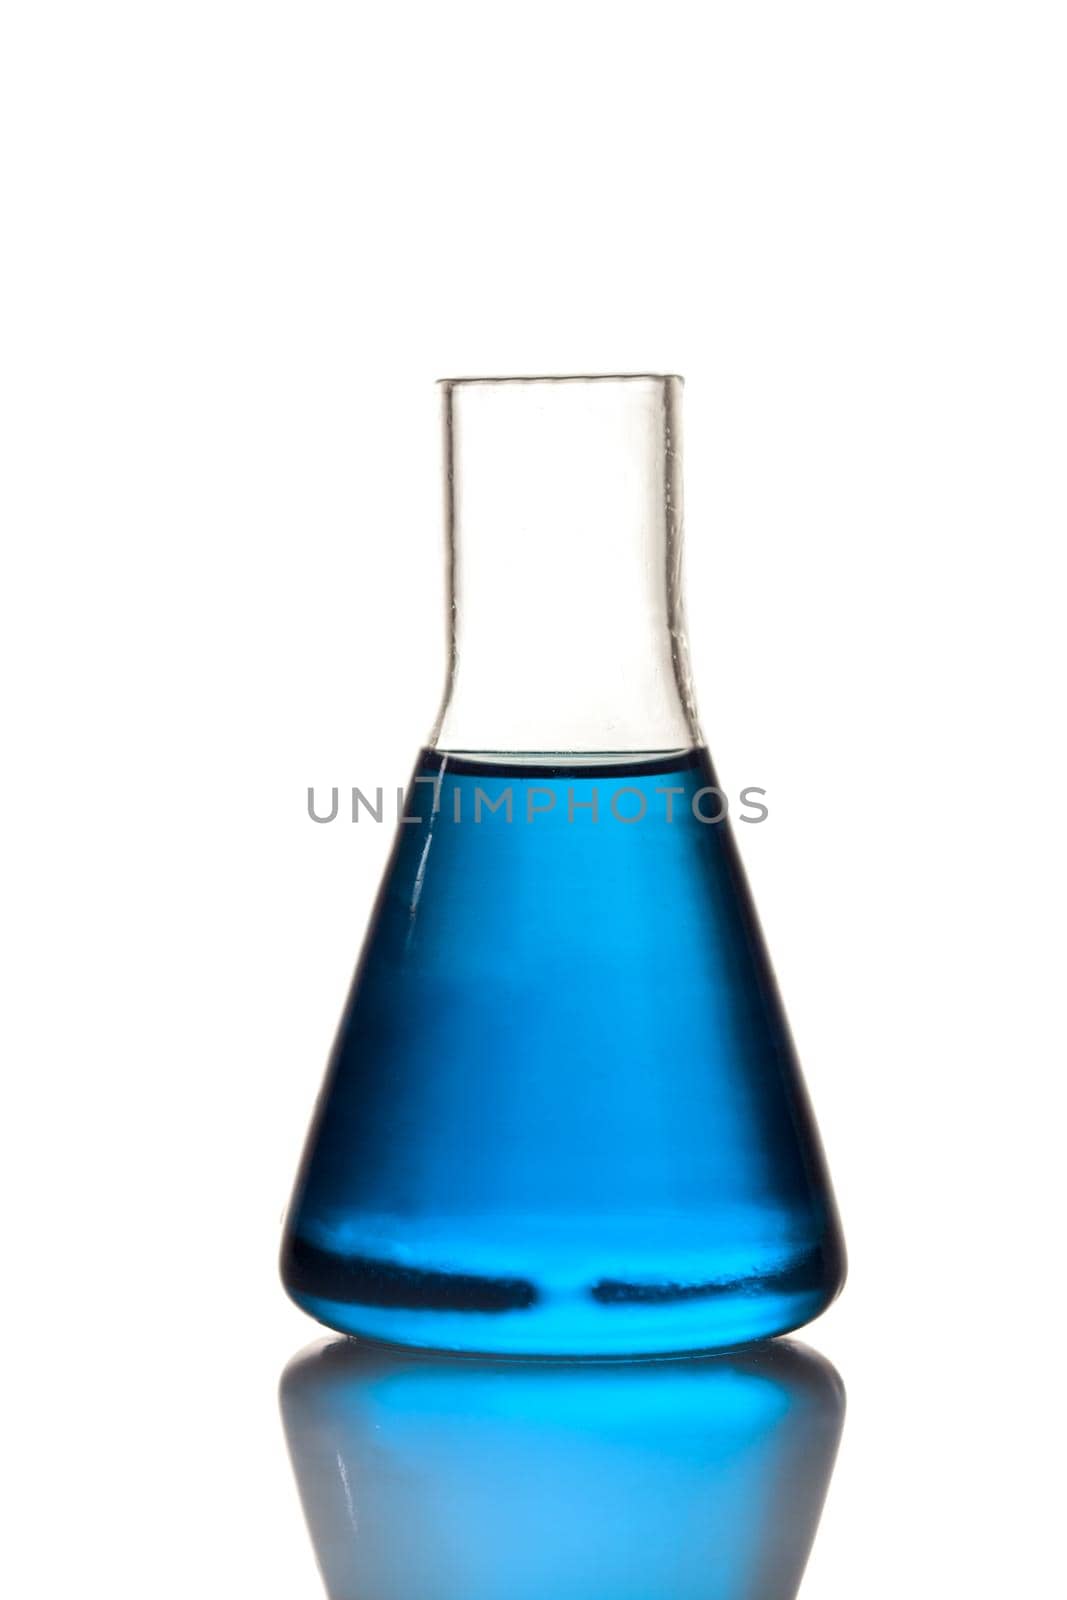 conical flask by oksix